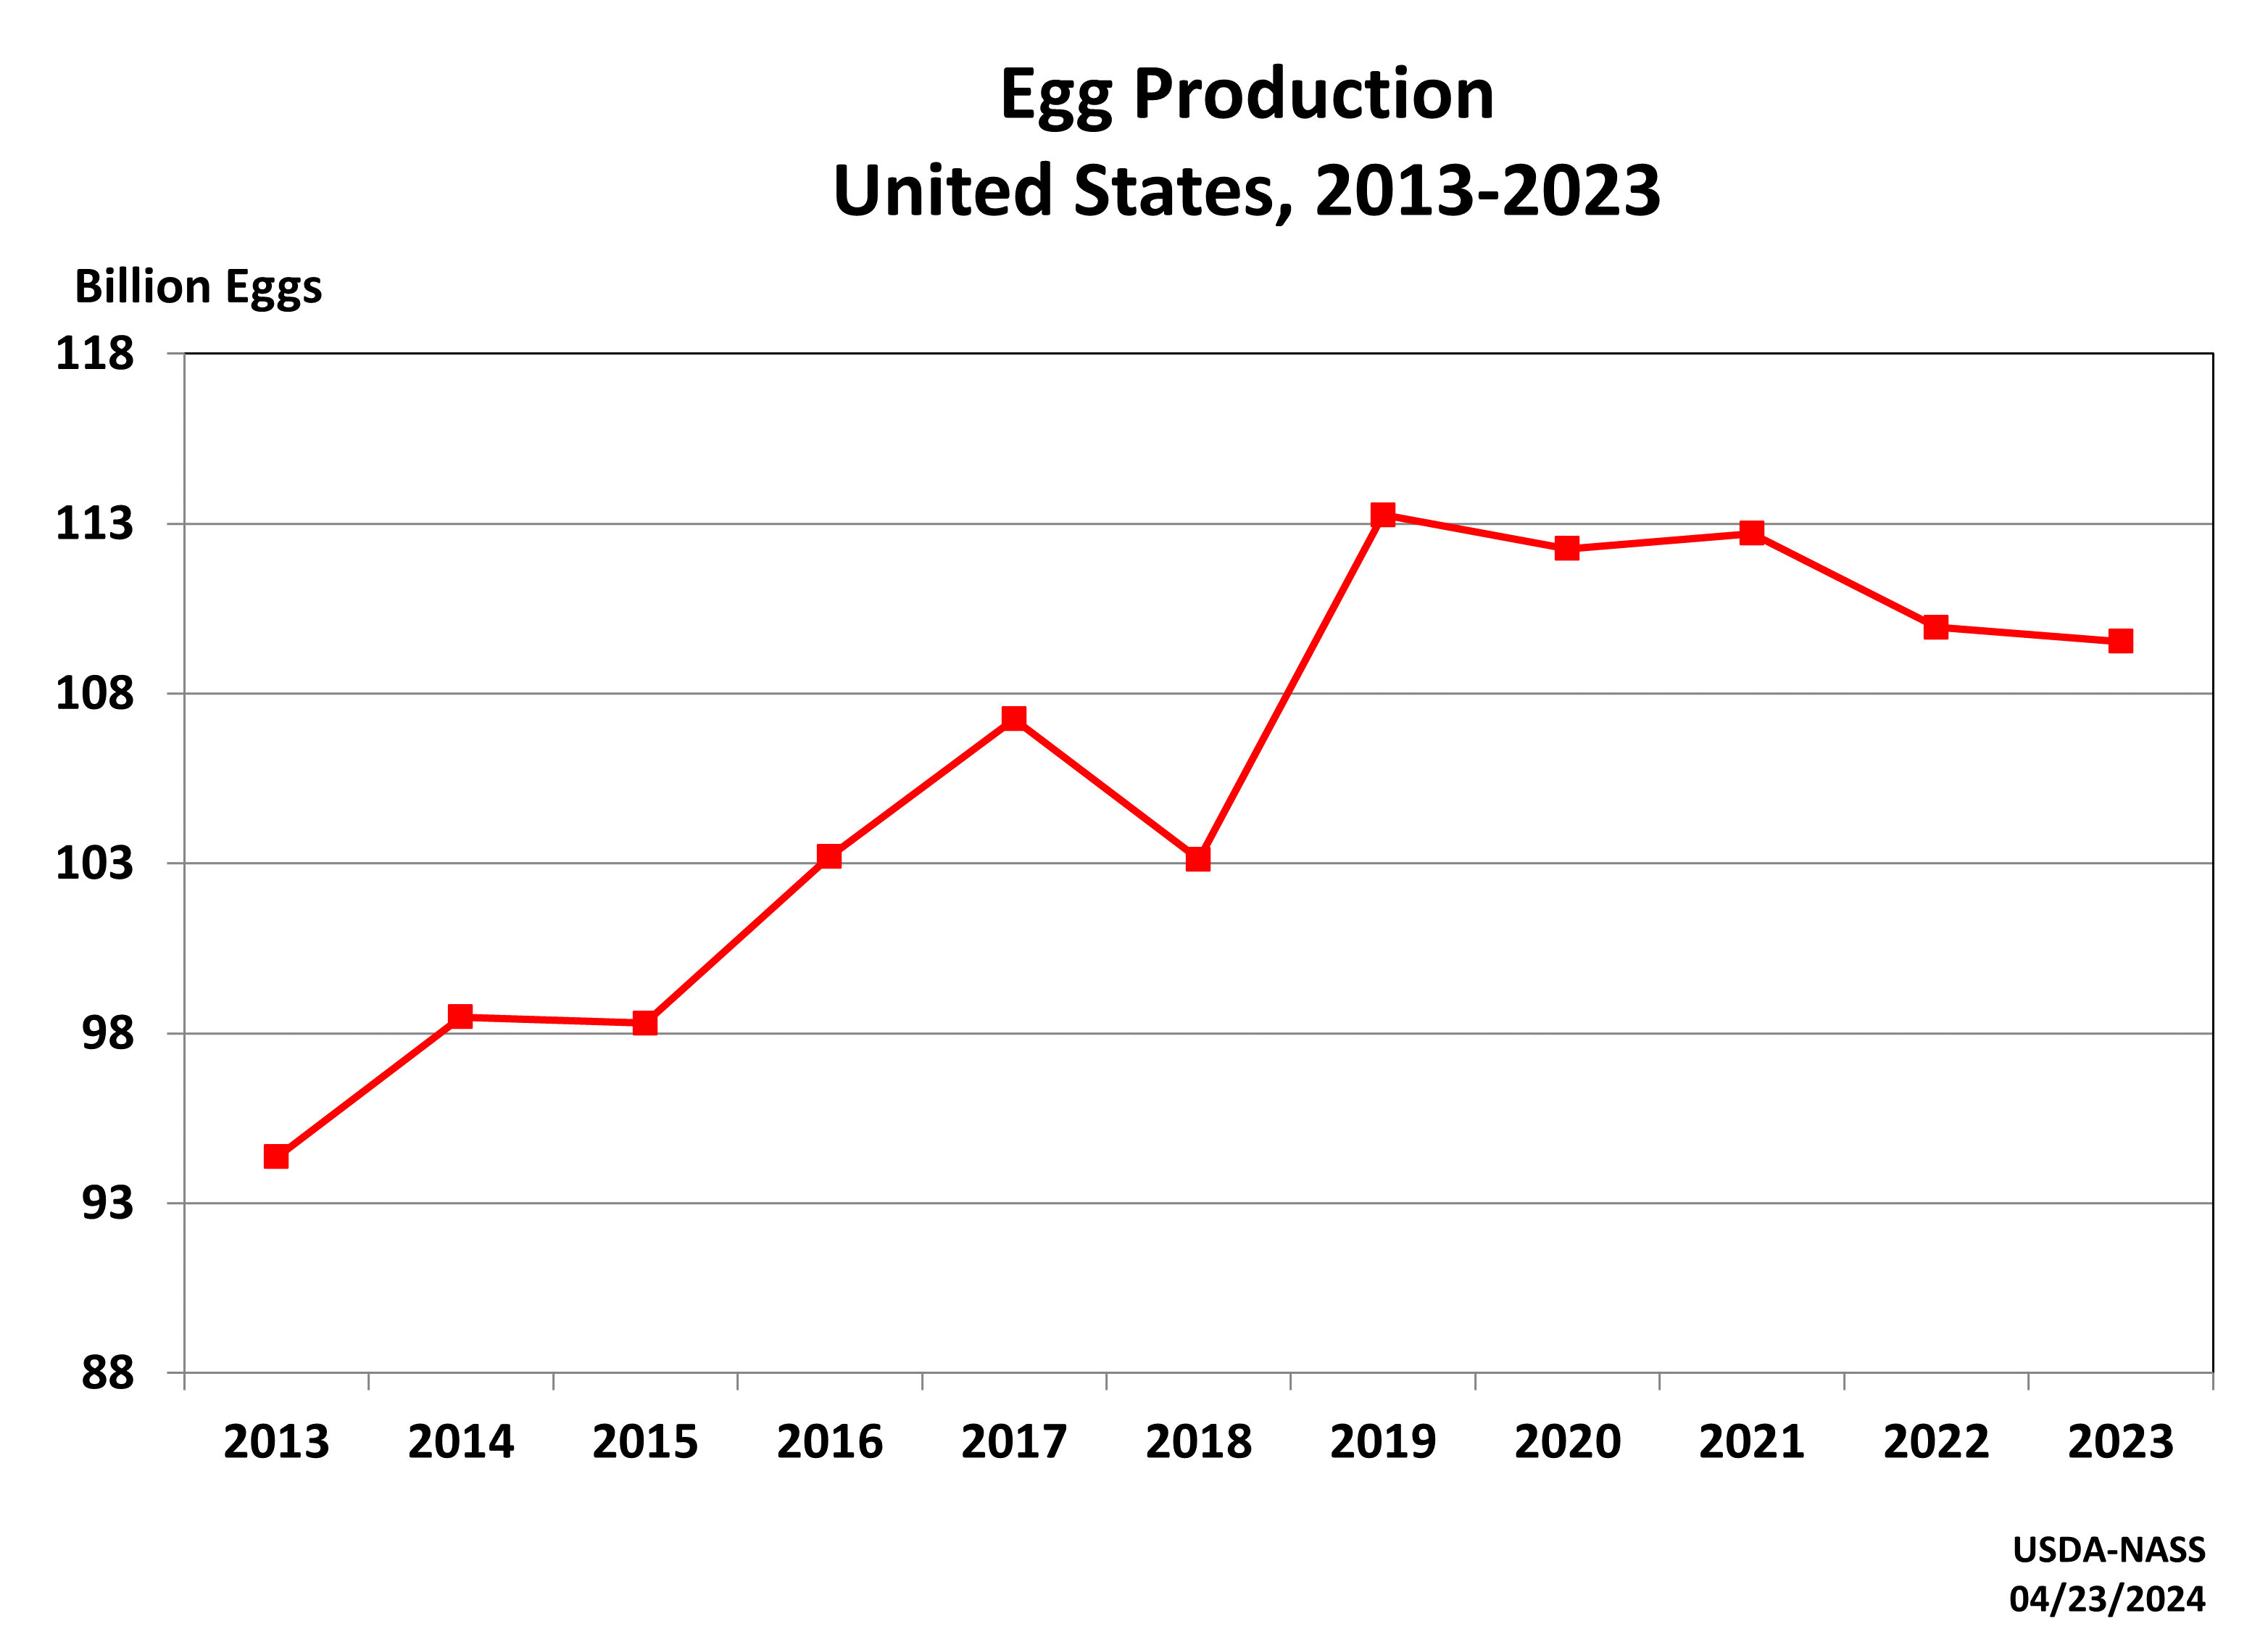 Layers and Eggs: Production by Year, US